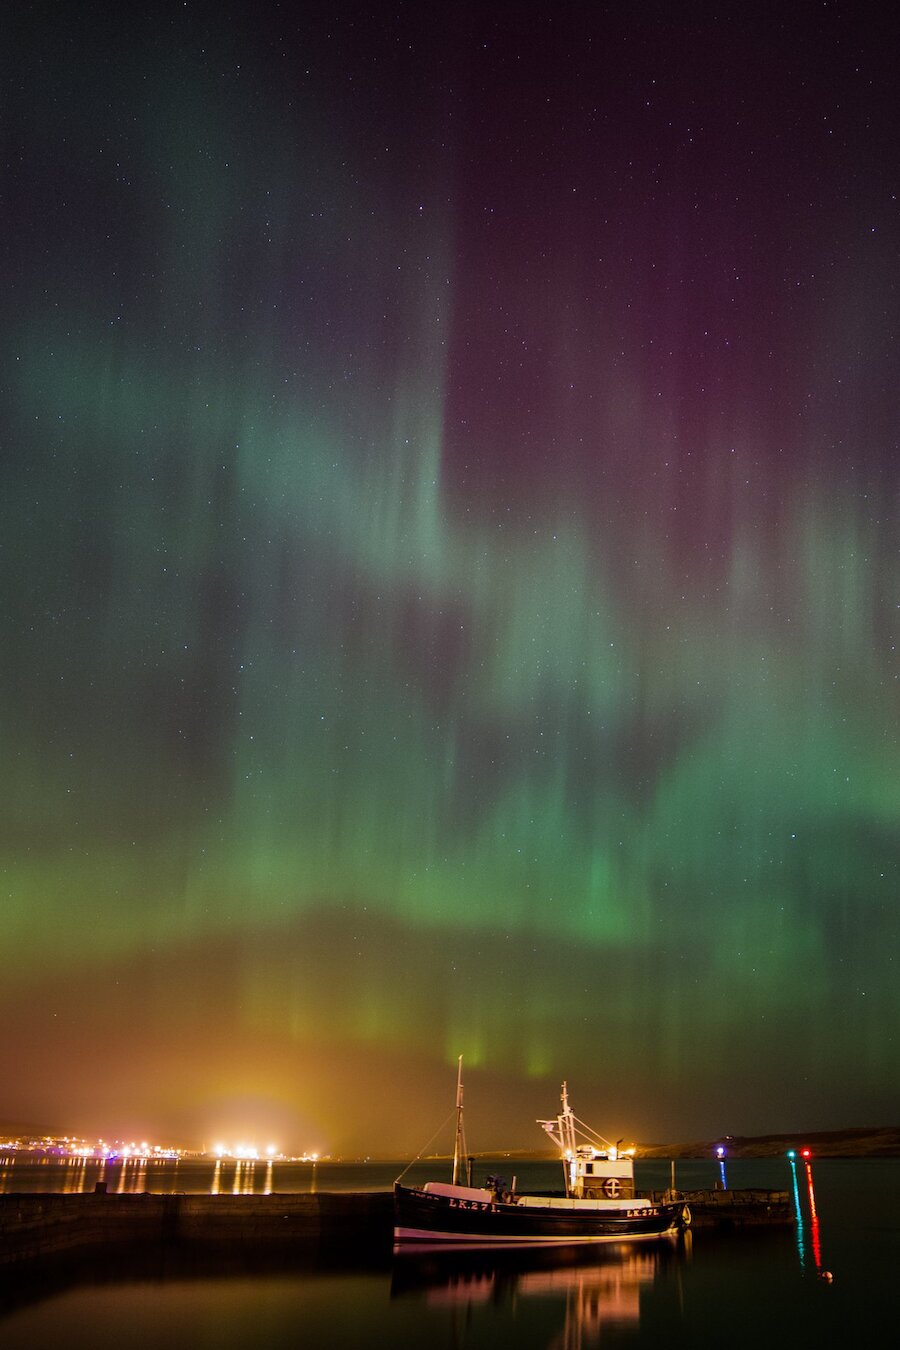 The spectacular northern lights or 'Mirrie Dancers' over Shetland